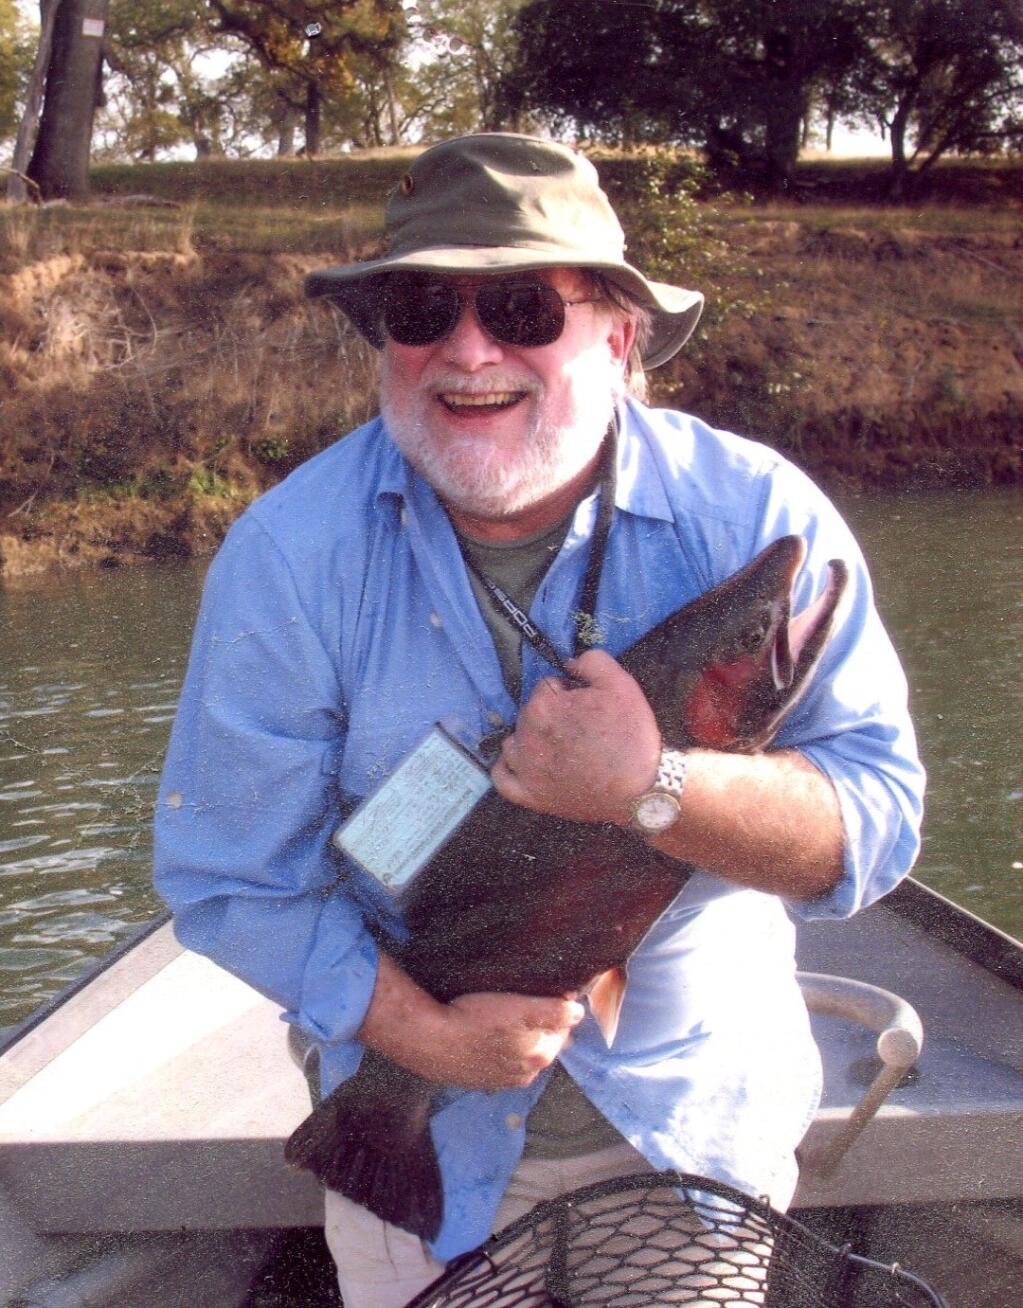 While winter fishing for rainbow trout with Steve Kyle and guide Tyler Lee on the lower Sacramento River between Redding and Anderson several years ago, I caught and released this large steelhead (a rainbow trout that’s gone to the ocean and back).